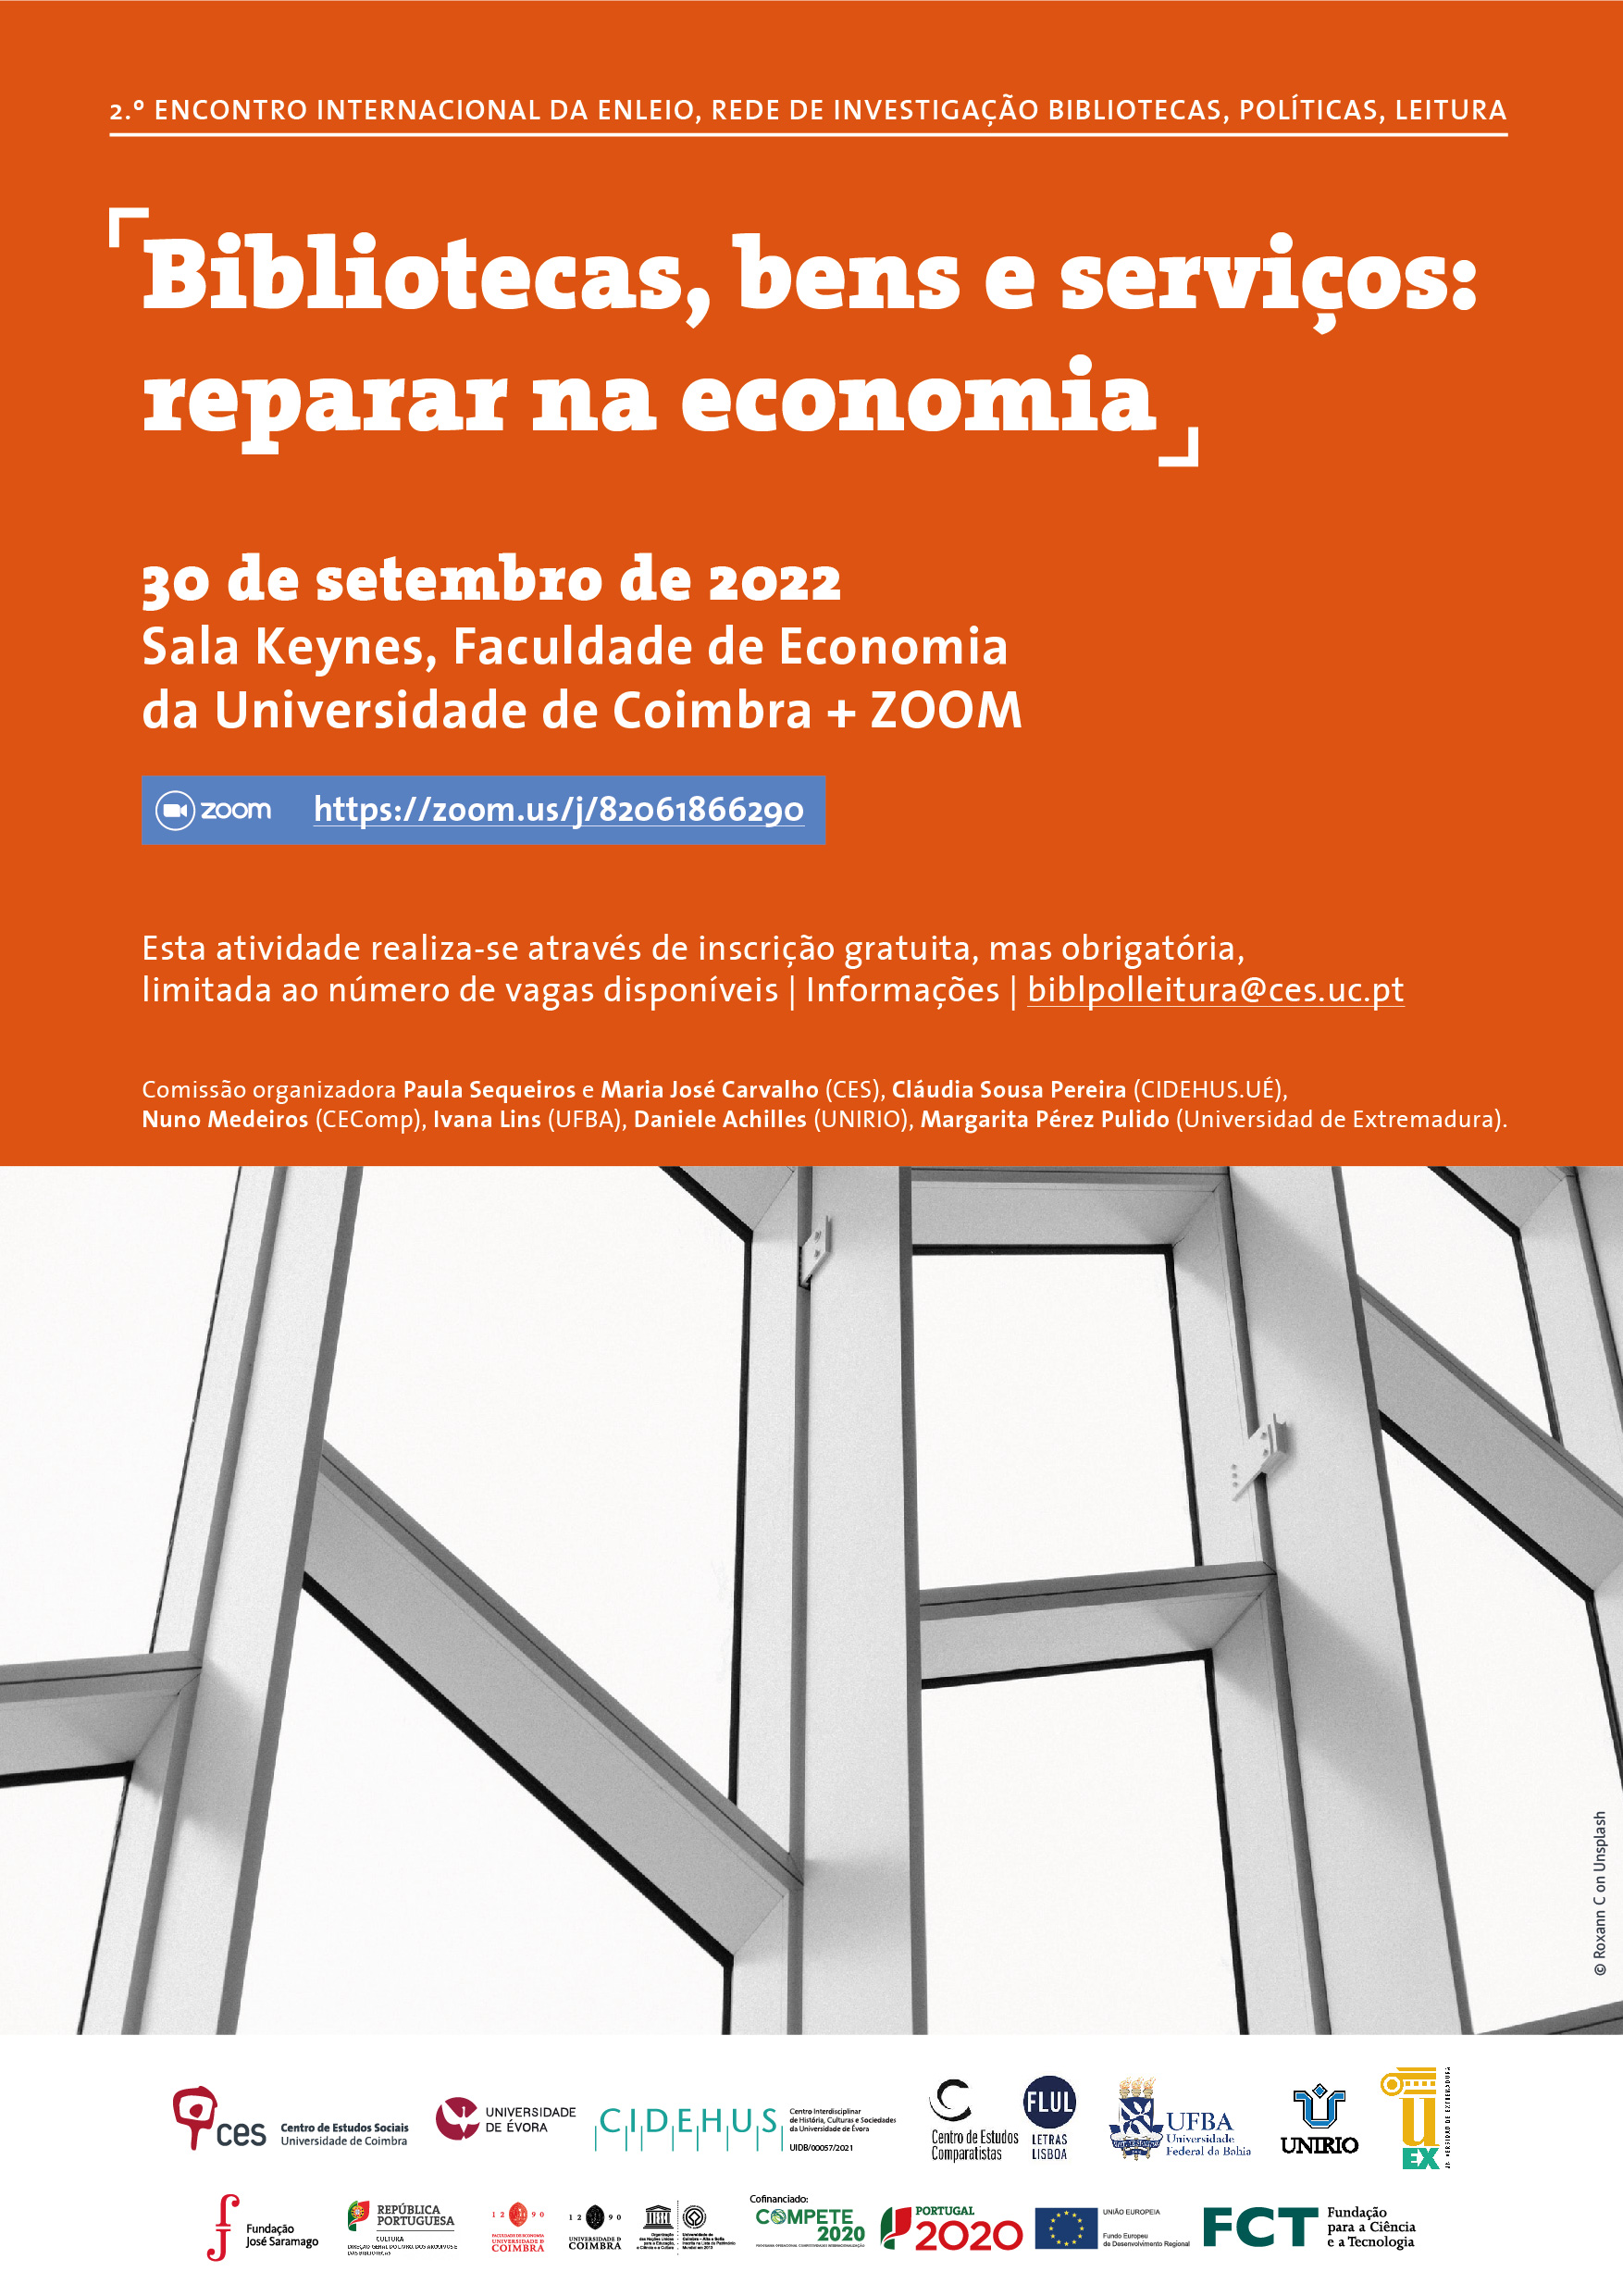 Libraries, goods and services: repairing the economy<br />
	 <span id="edit_40063"><script>$(function() { $('#edit_40063').load( "/myces/user/editobj.php?tipo=evento&id=40063" ); });</script></span>